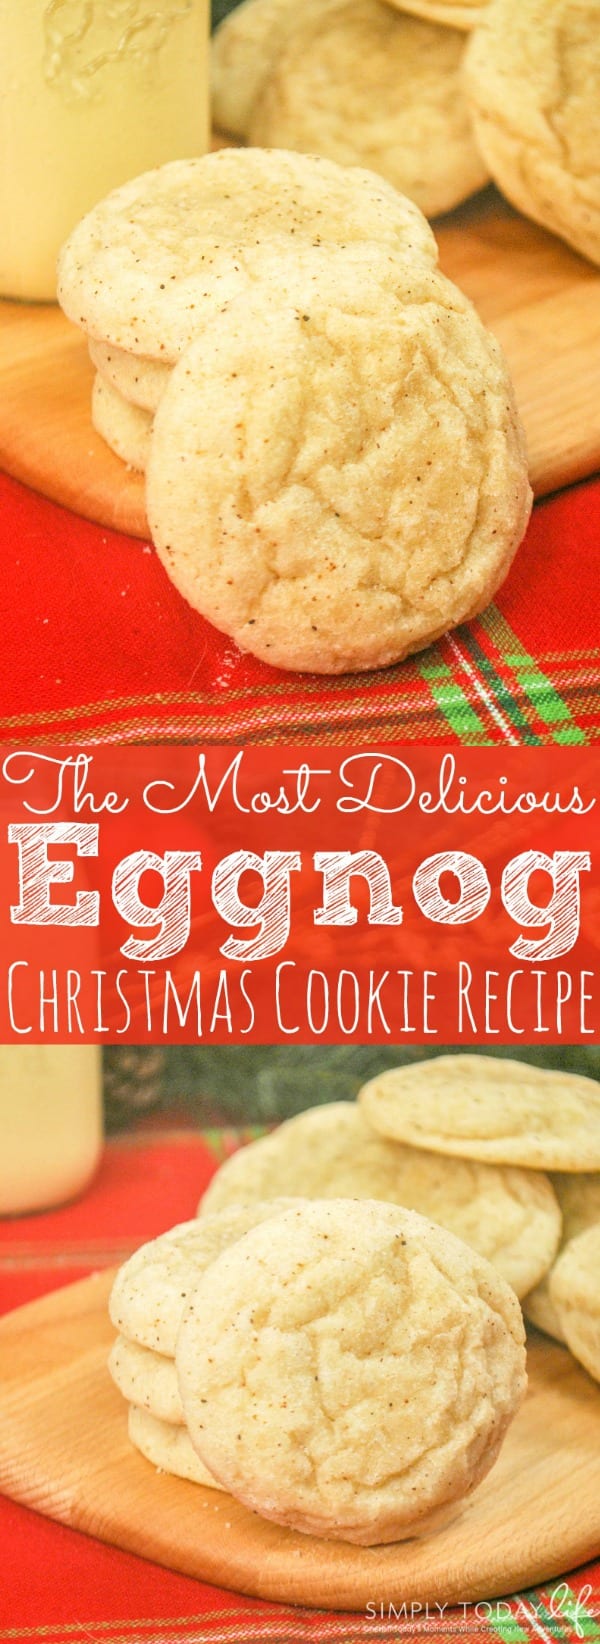 The Most Delicious Eggnog Christmas Cookies